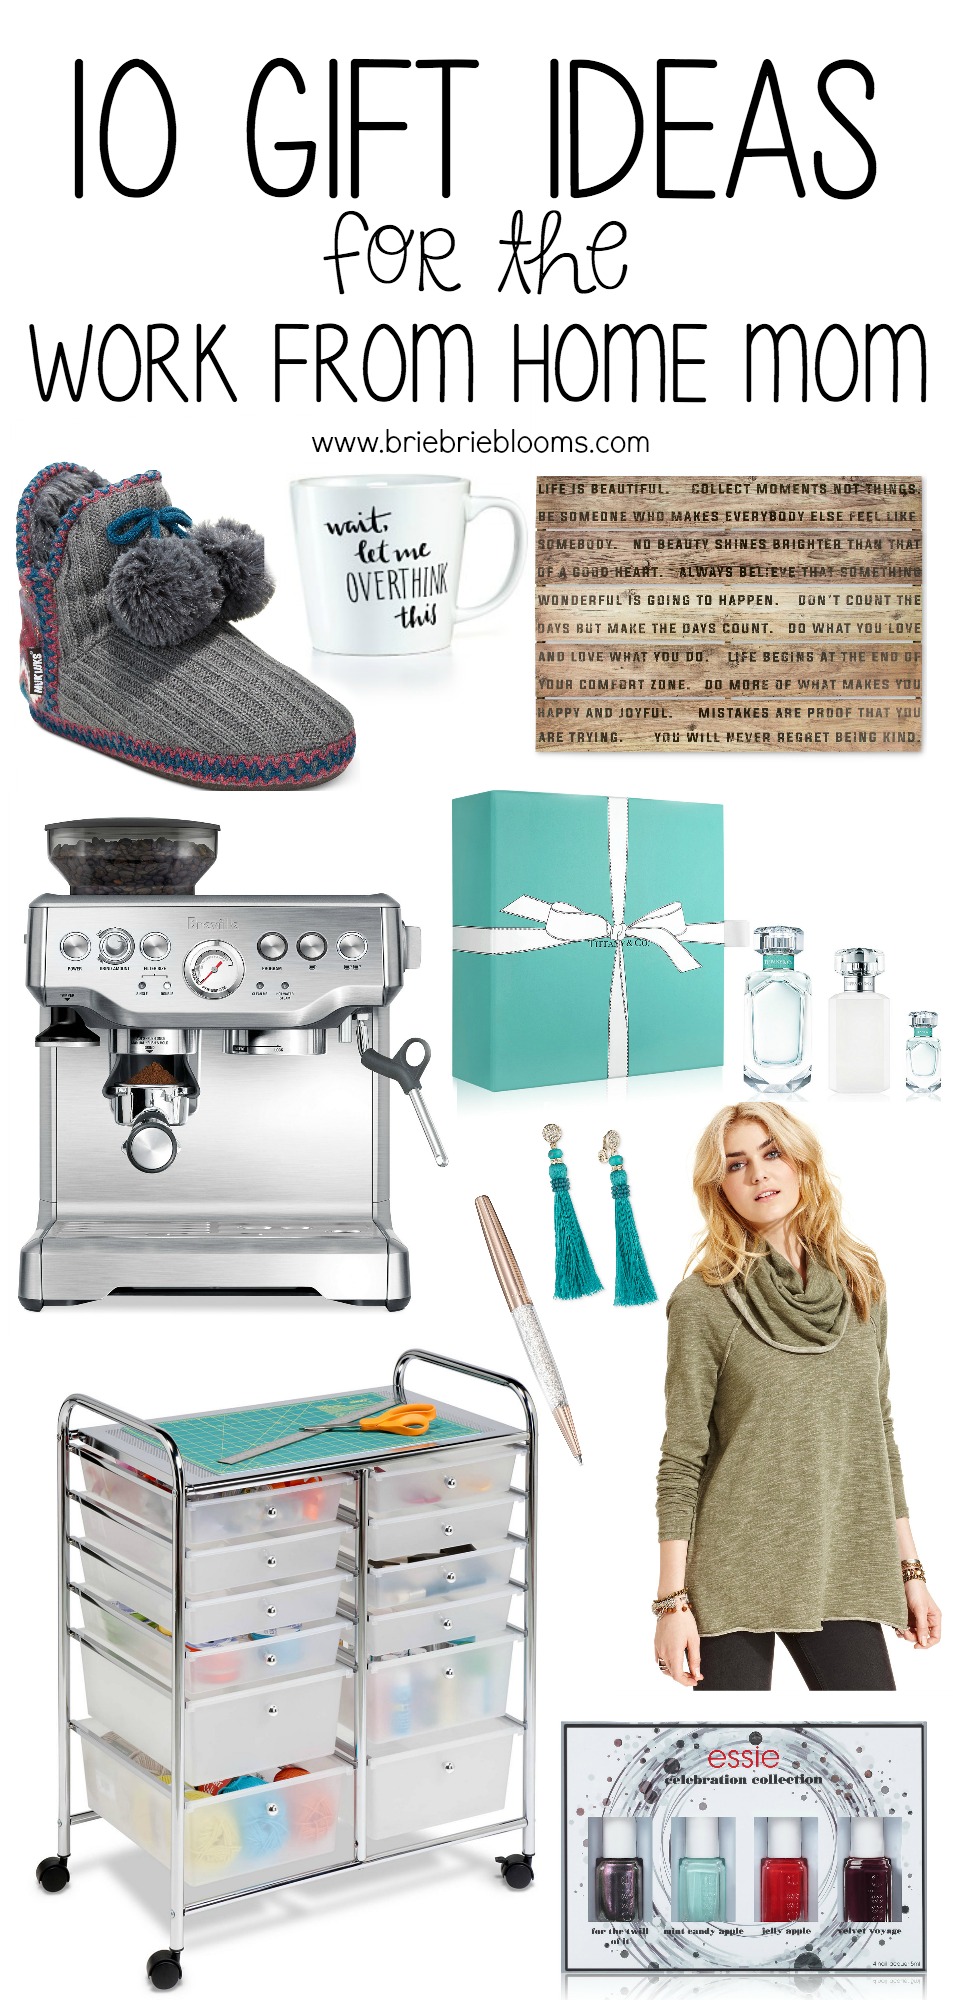 10 gift ideas for the work from home mom is a collection of gifts perfect for any mom spending her days working from a home office.